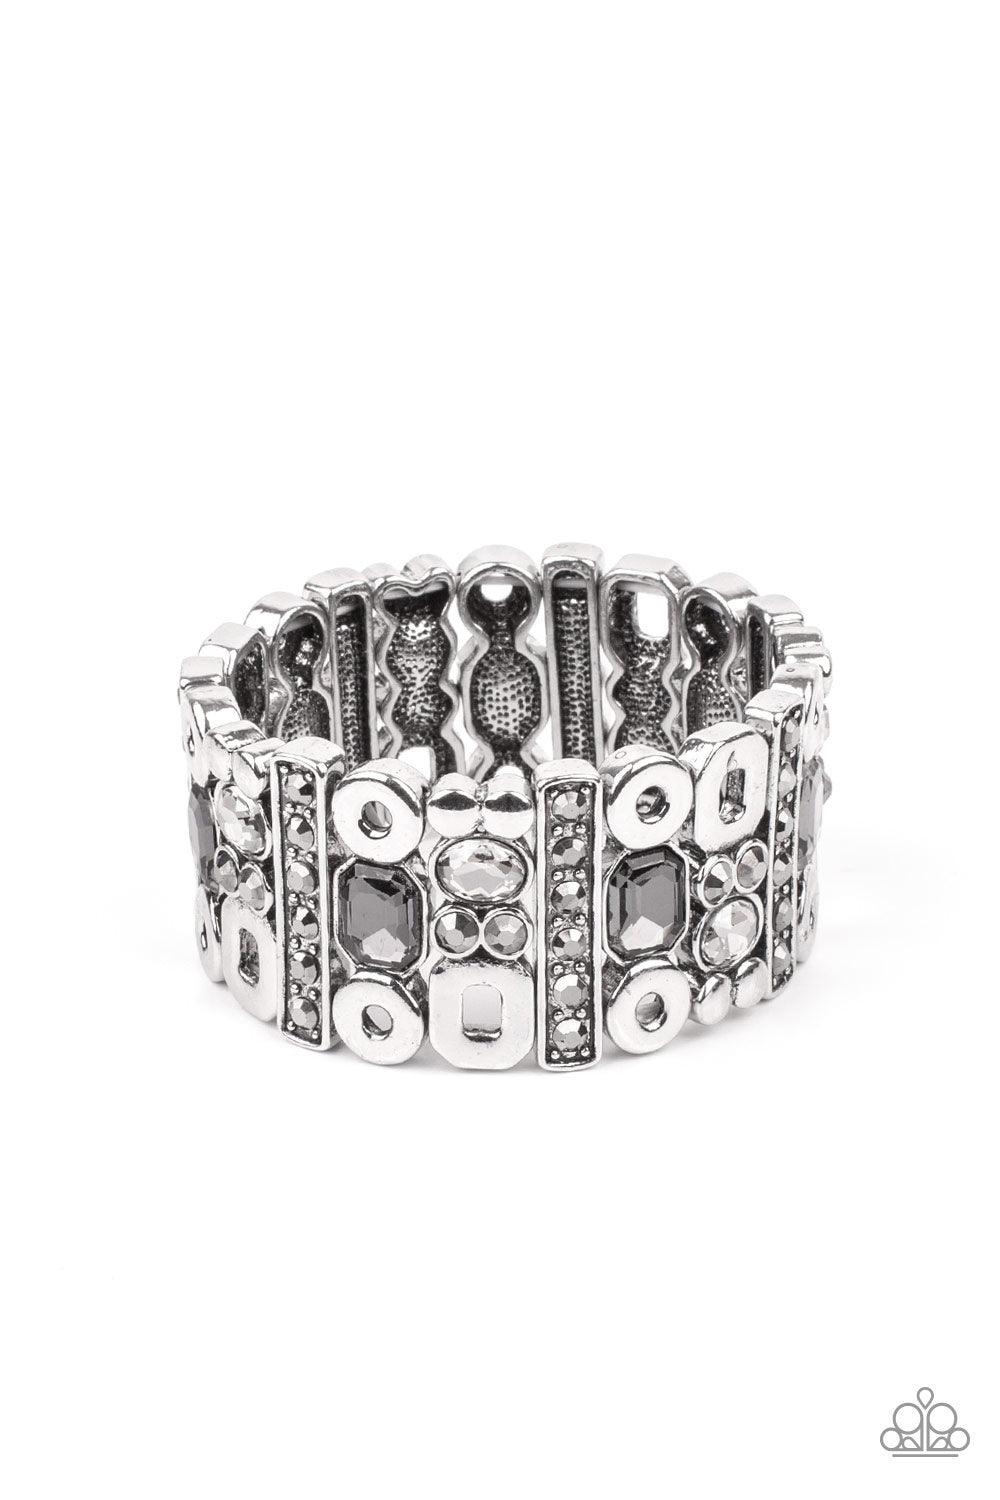 Paparazzi Accessories Dynamically Diverse - Silver Infused with flat silver studs and geometric silver accents, a mismatched assortment of oval, round, and emerald style hematite and smoky rhinestones coalesce into edgy frames along a stretchy band for an